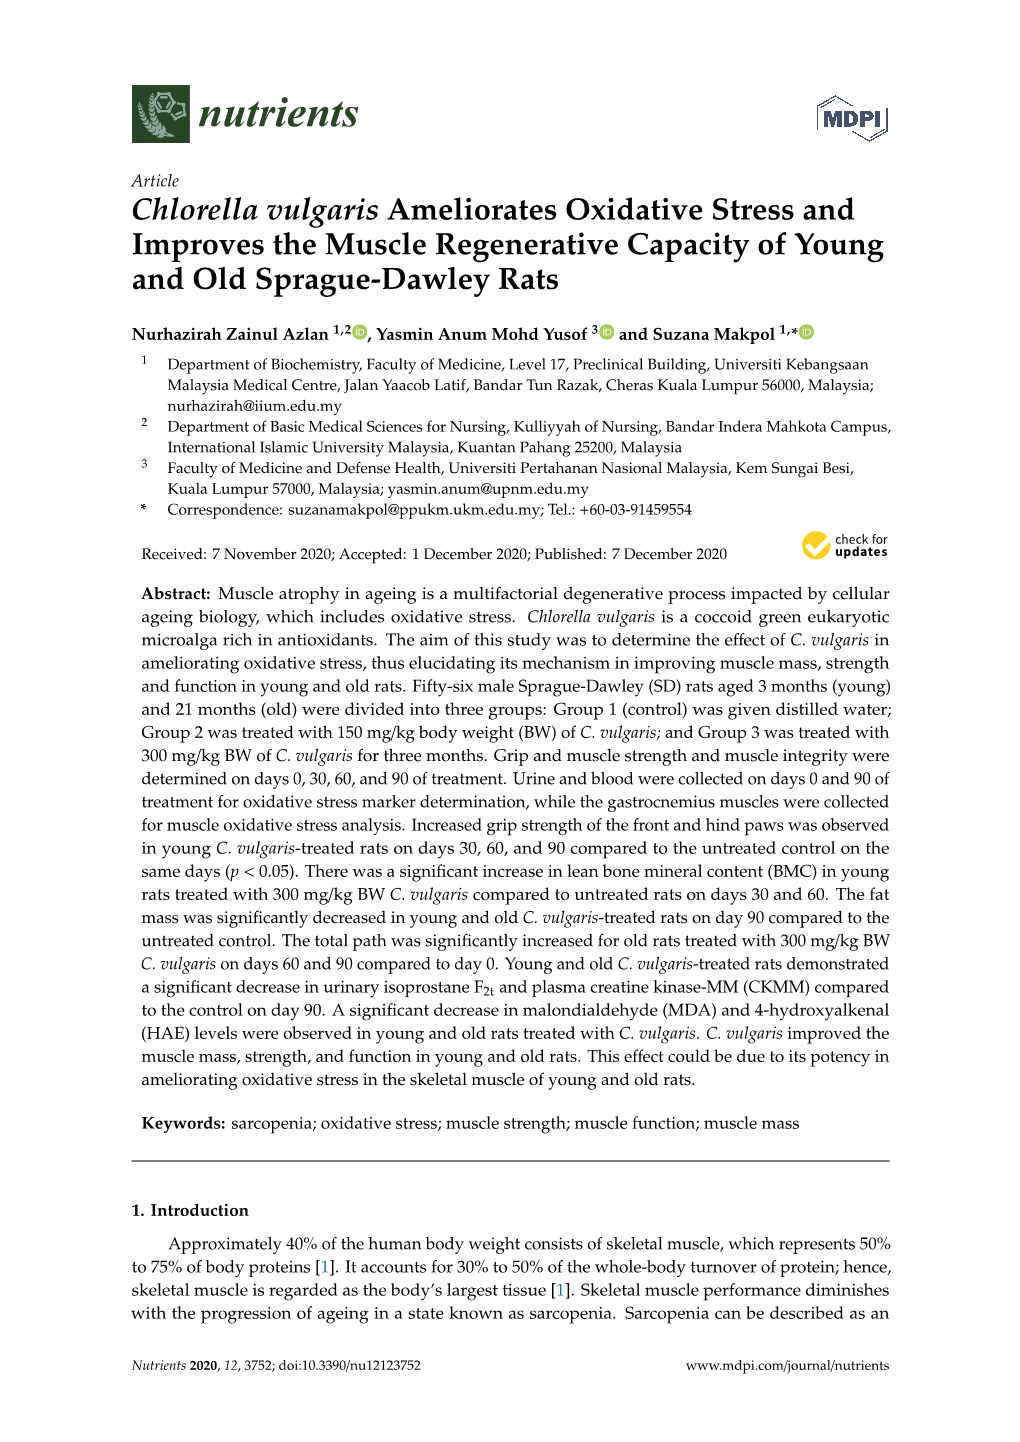 Chlorella Vulgaris Ameliorates Oxidative Stress and Improves the Muscle Regenerative Capacity of Young and Old Sprague-Dawley Rats